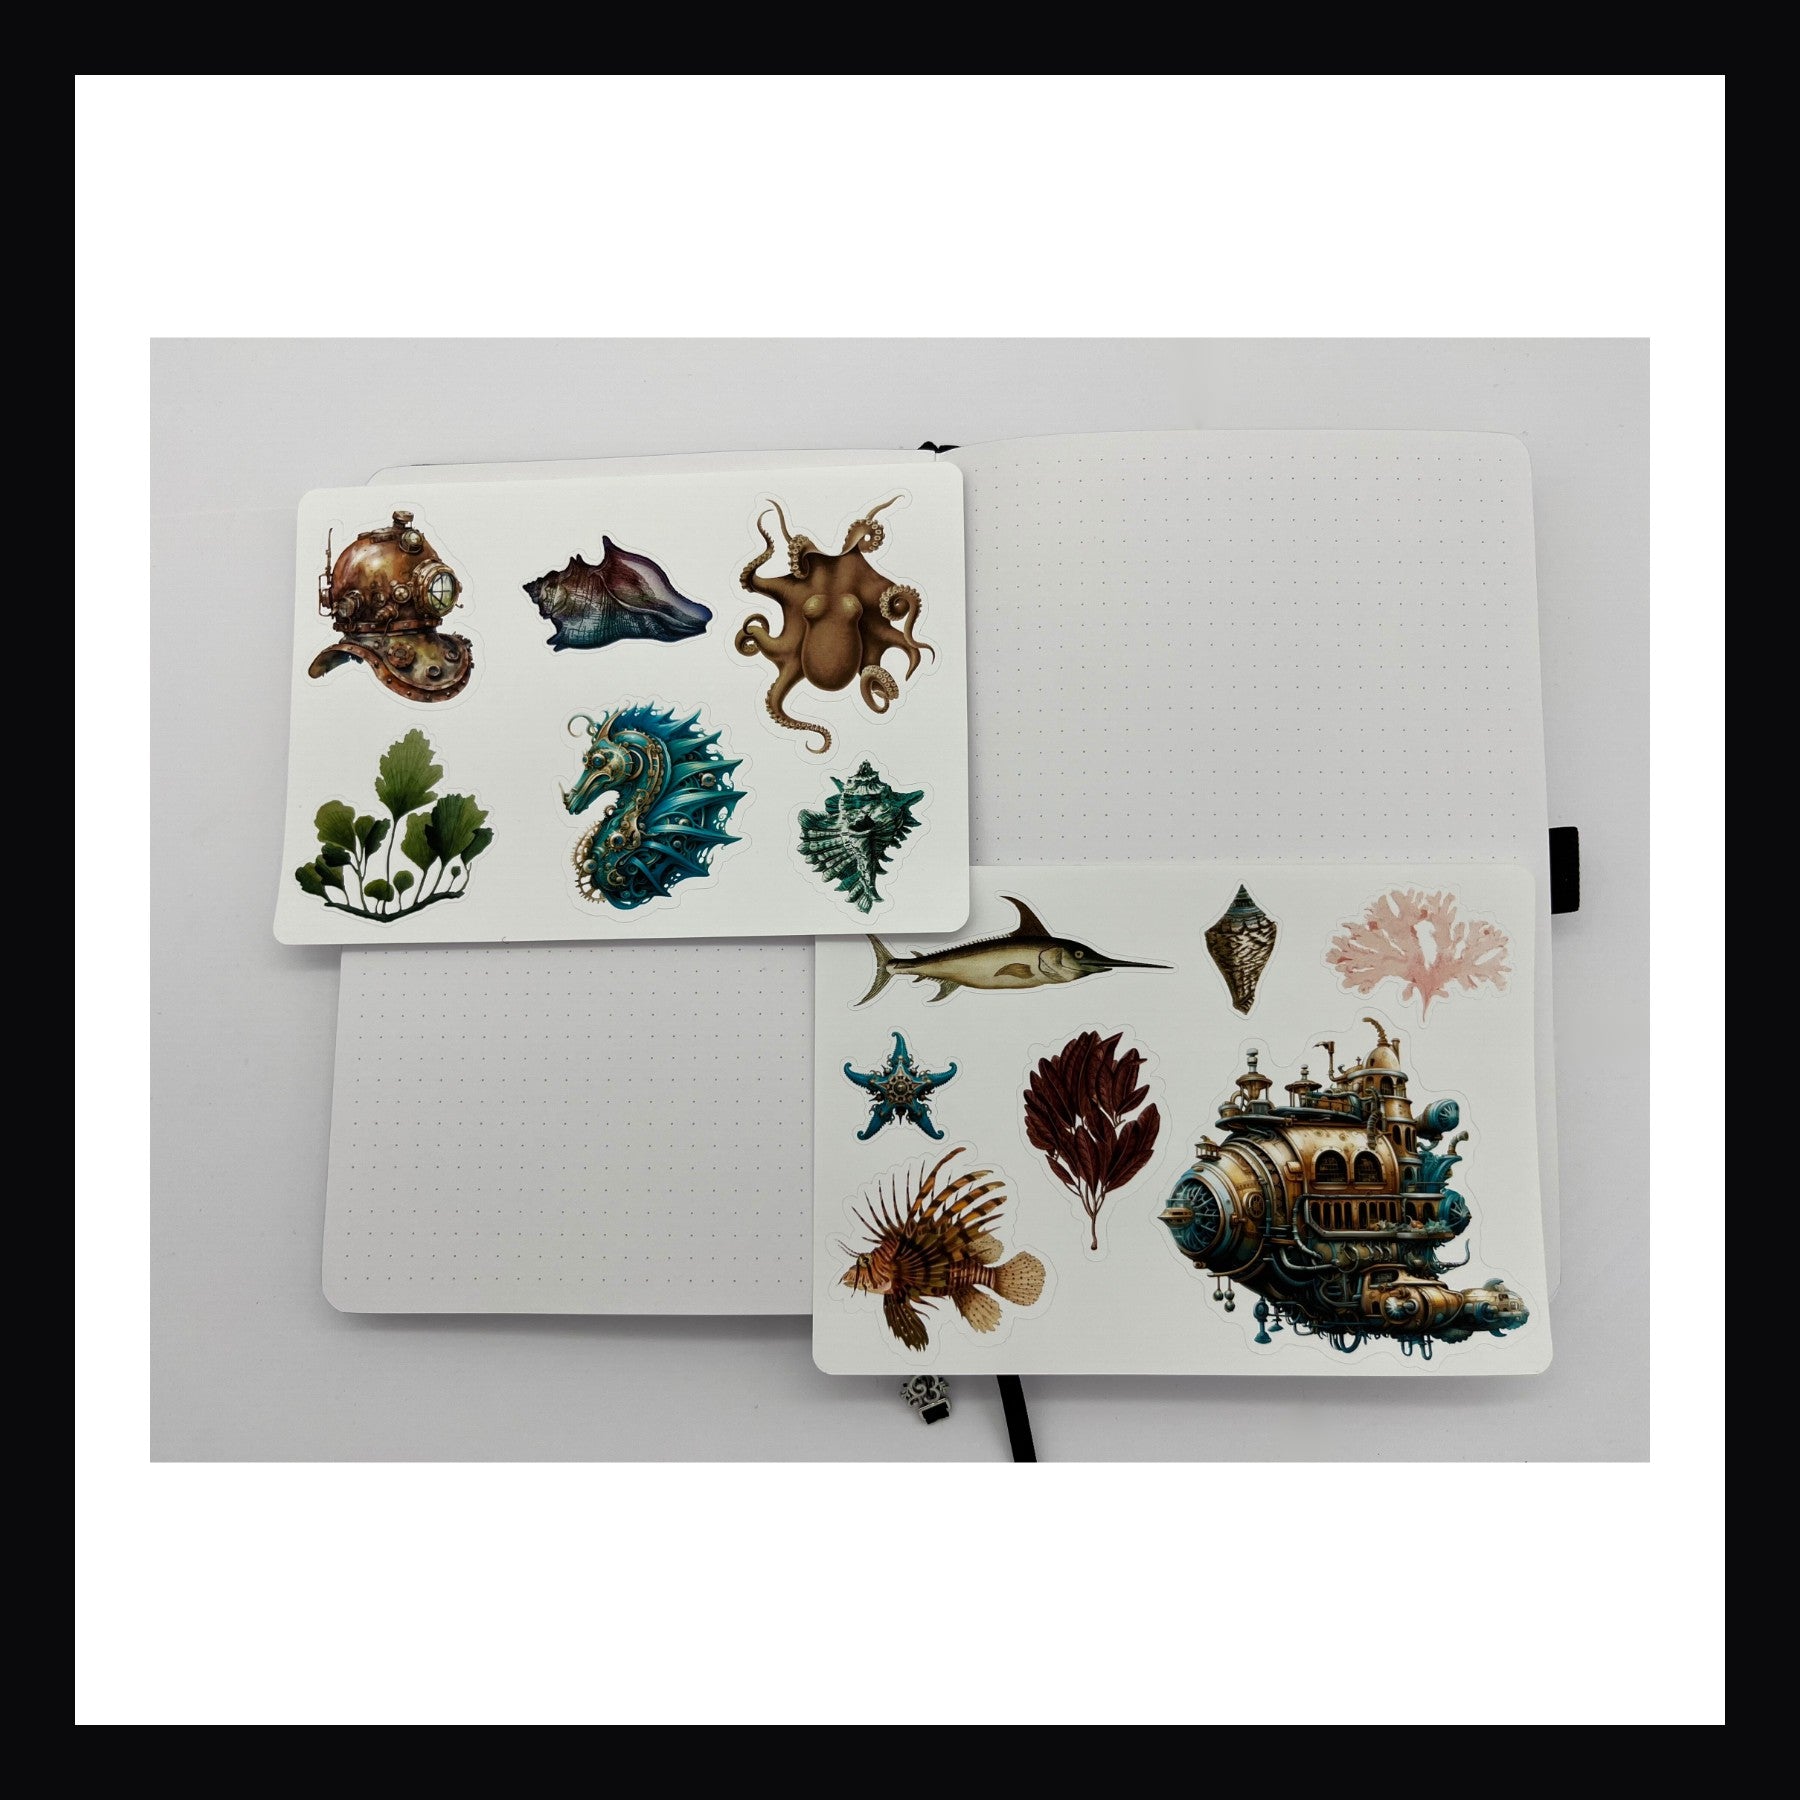 Steampunk Ocean Junk Journaling Kit contains 2 traditional sticker pages. Each page measures 5x7" and features various nautical themed images such as coral, shells, sea life, and steampunk vessels.